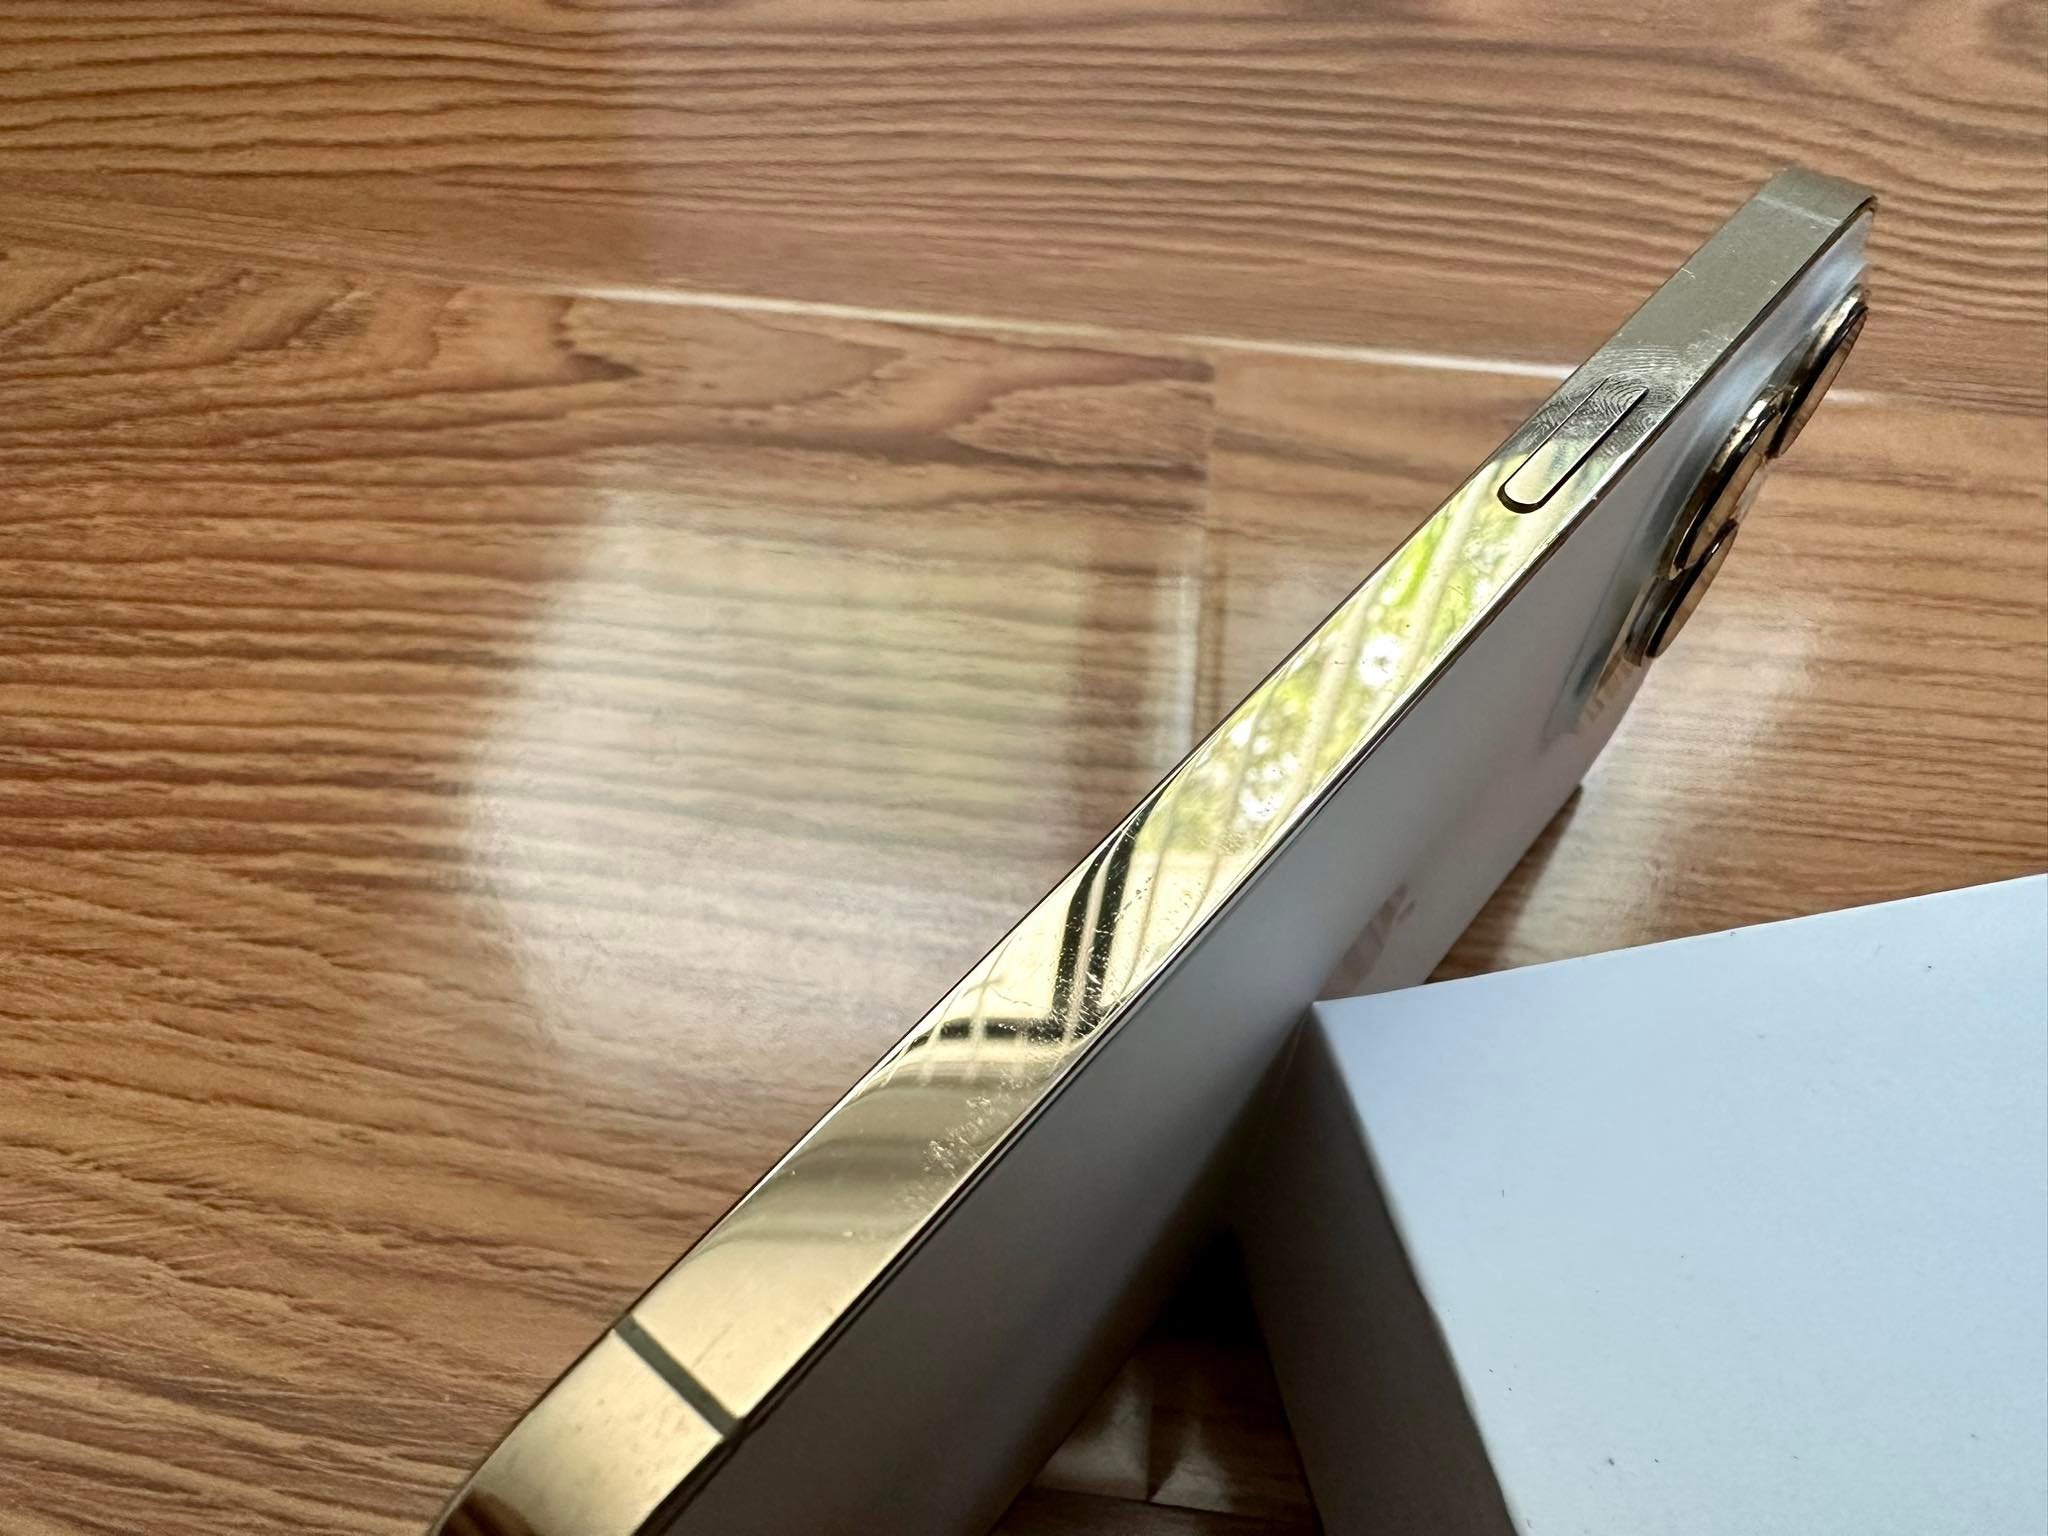 Apple iPhone 12 Pro 128GB 5G Gold (As New) New Display * Free Case, Screen Protector, Shipping*